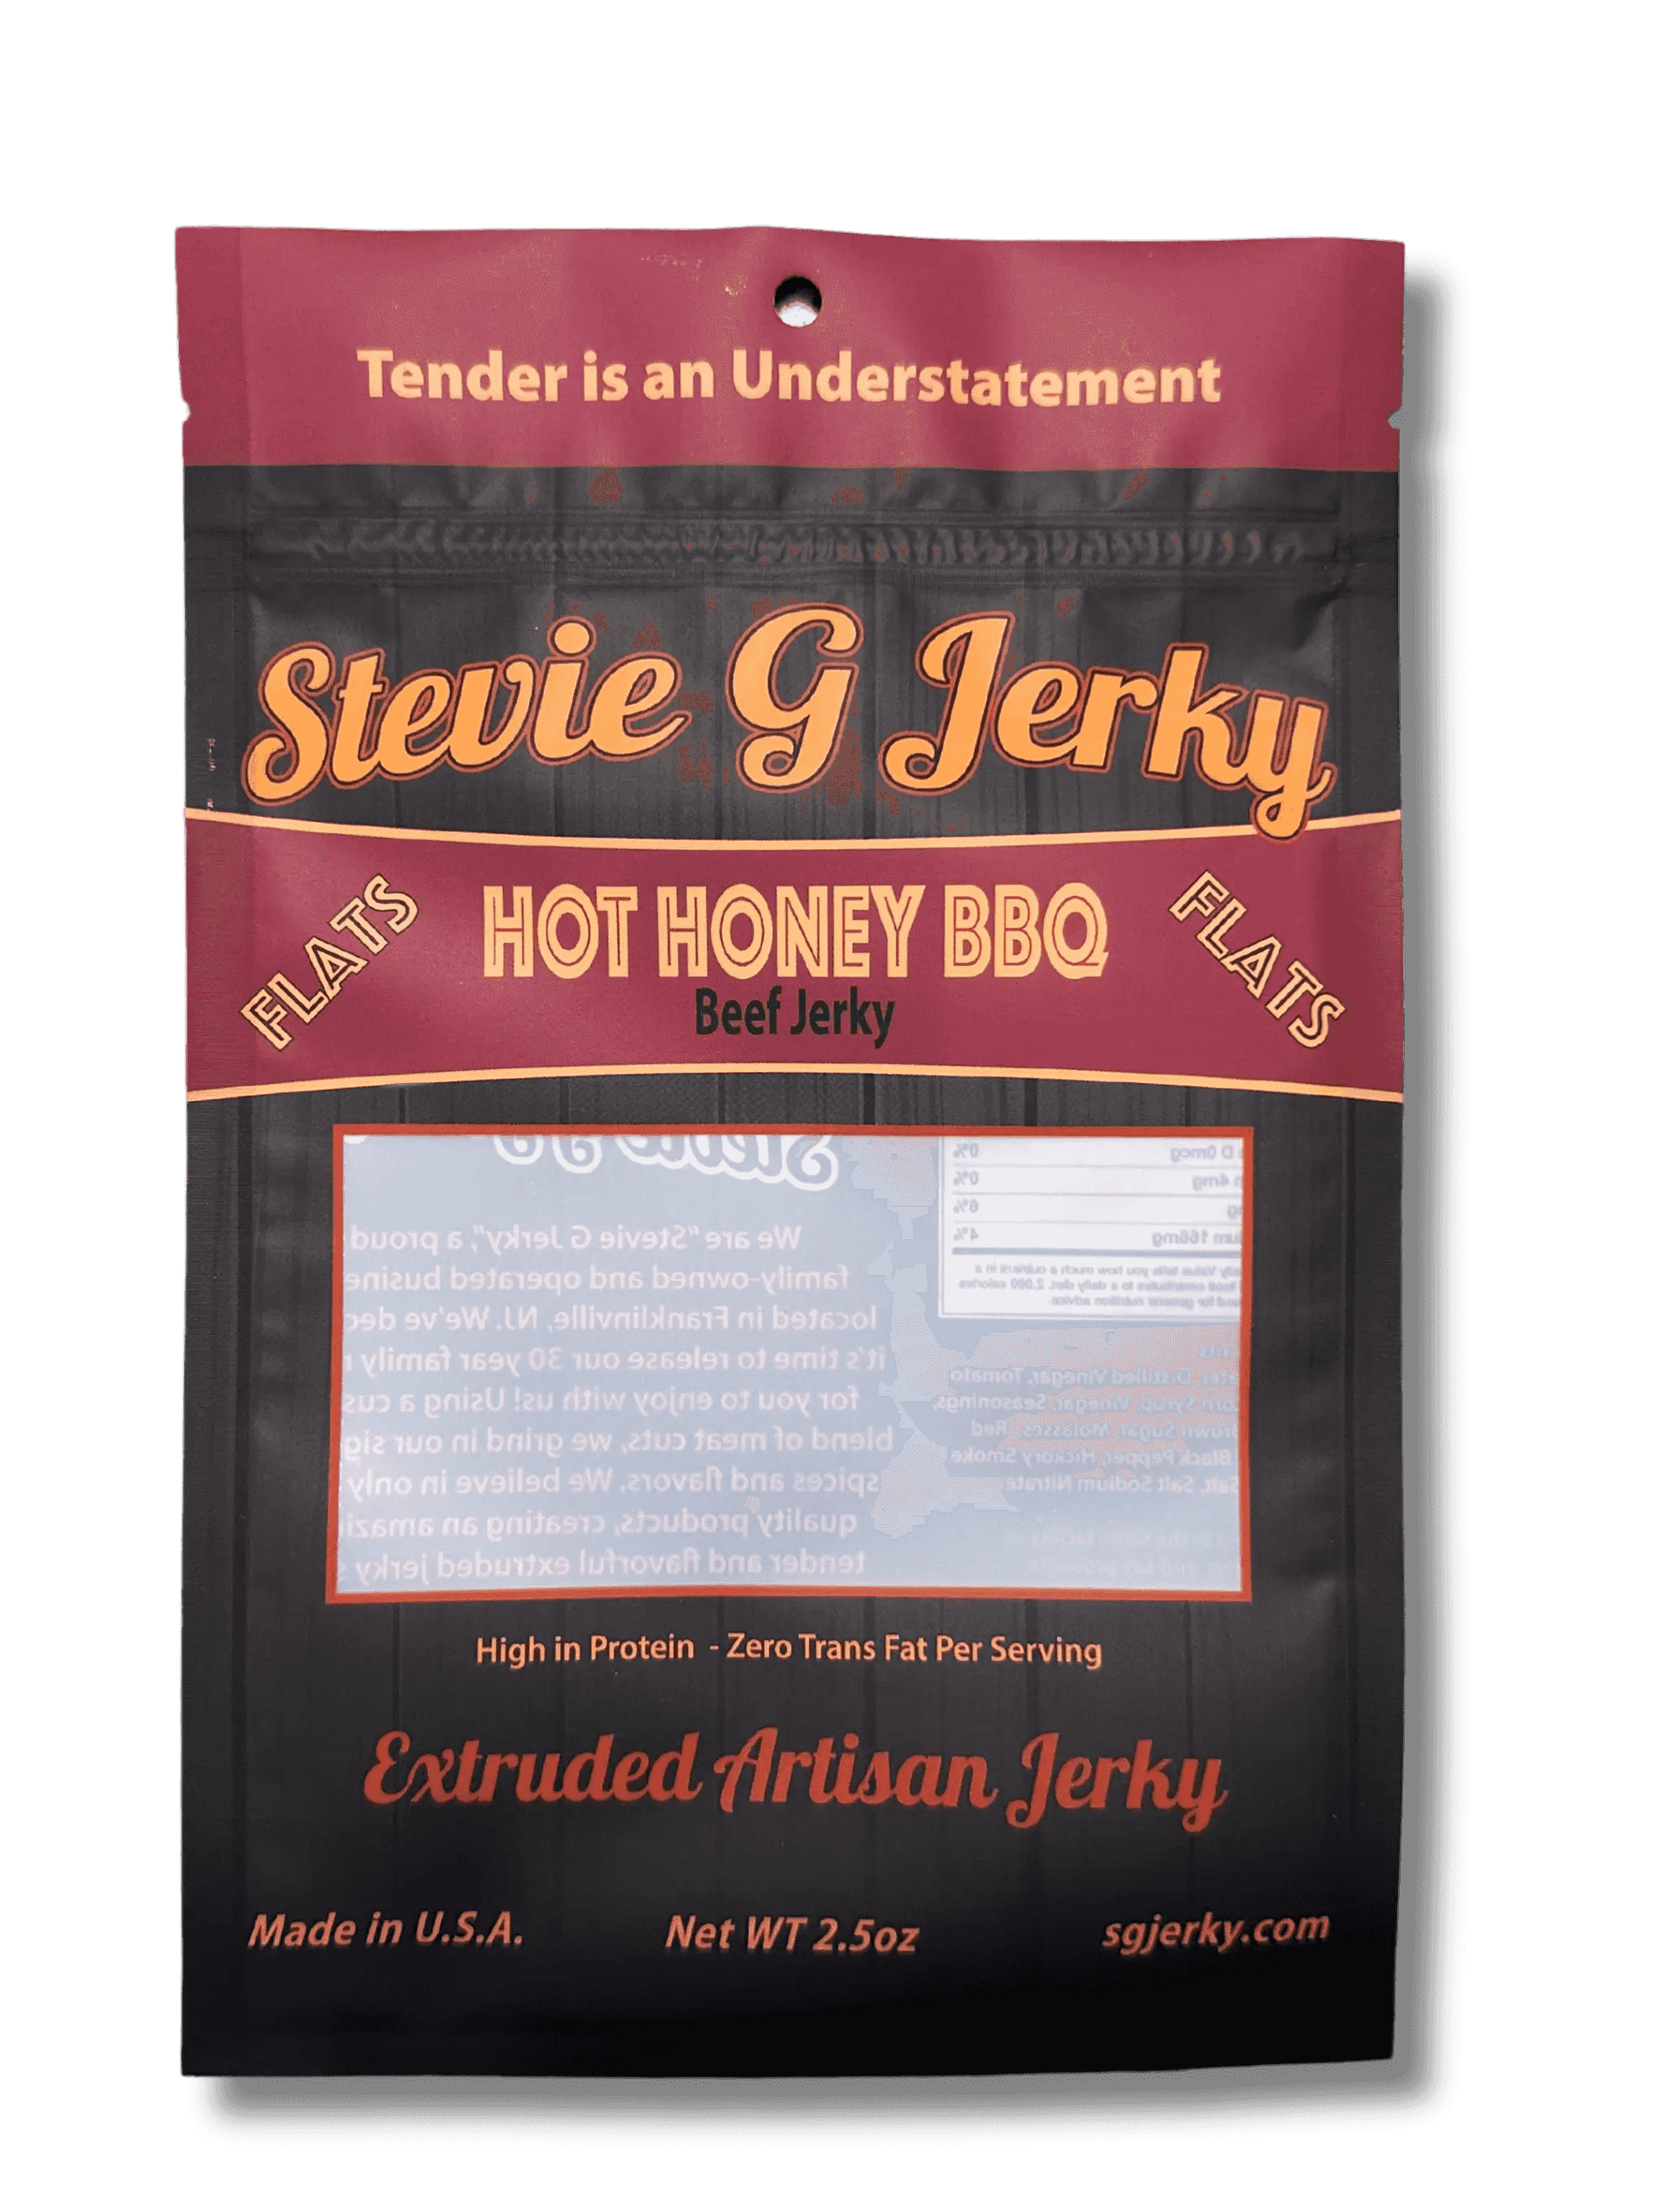 Hot-Honey BBQ Beef Jerky Flats product packaging